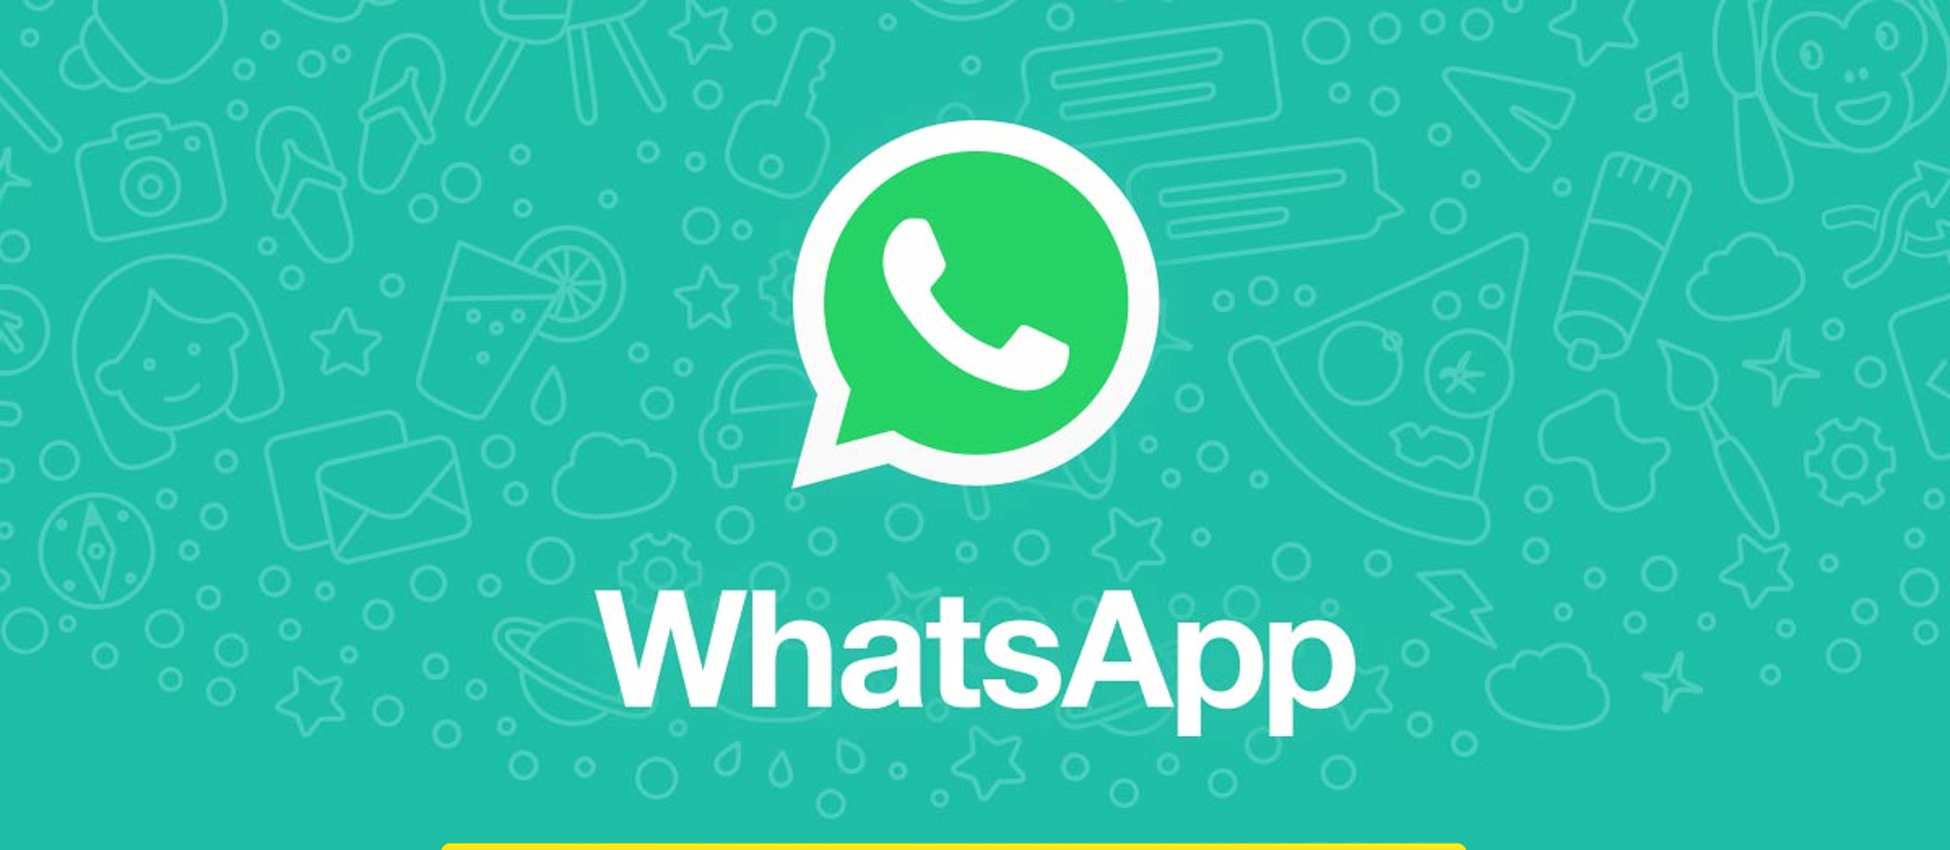 whatsapp business web download for pc